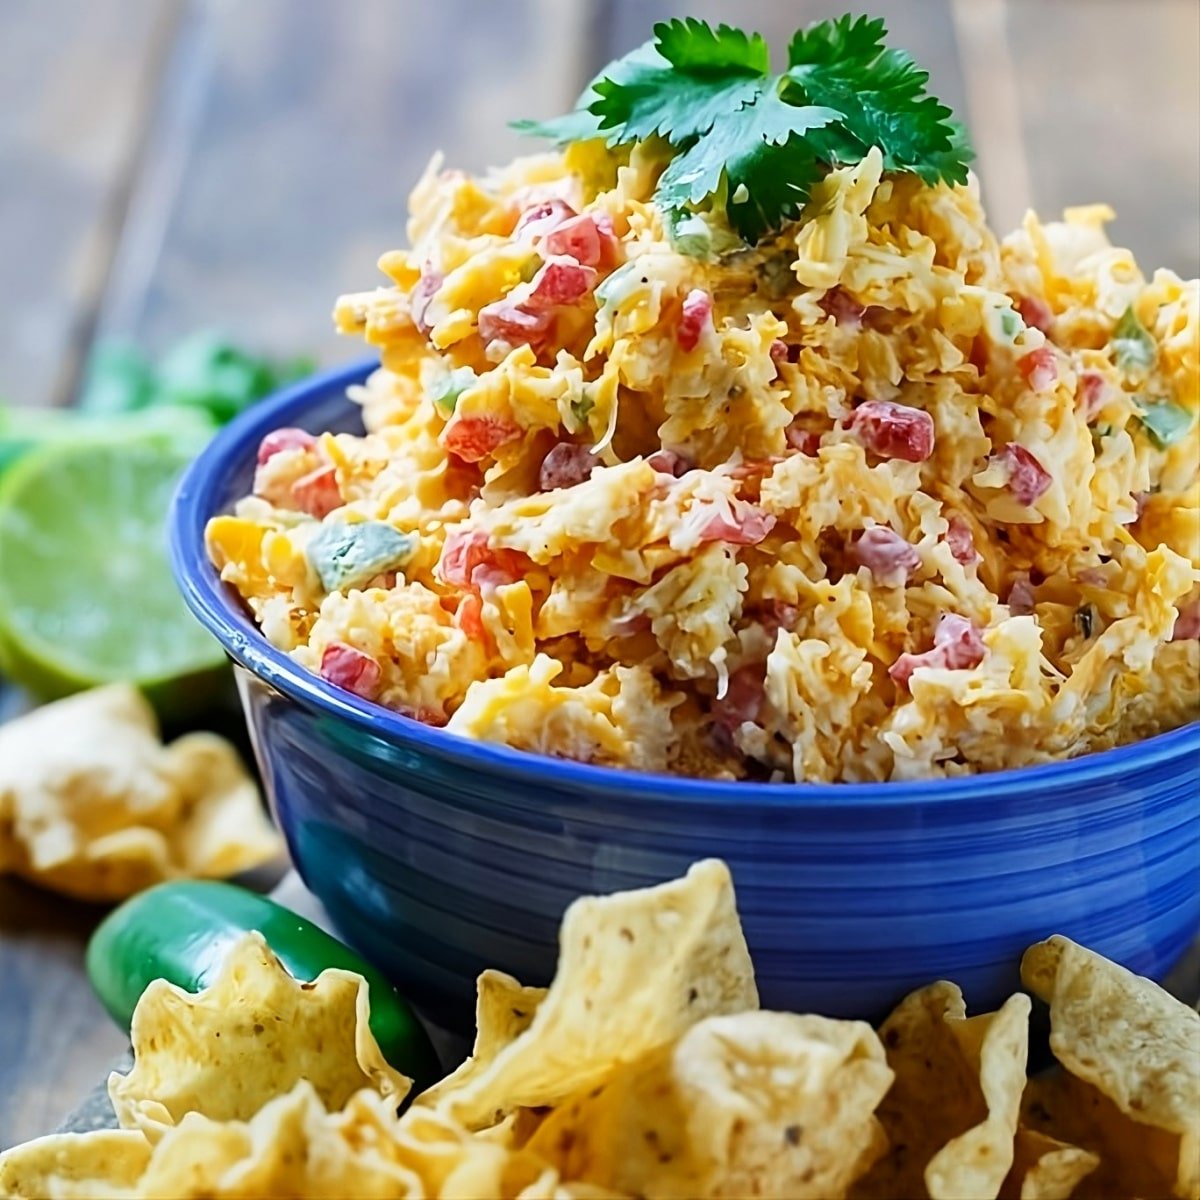 Tex-Mex Pimento Cheese in a bowl surrounded by tortilla chips.